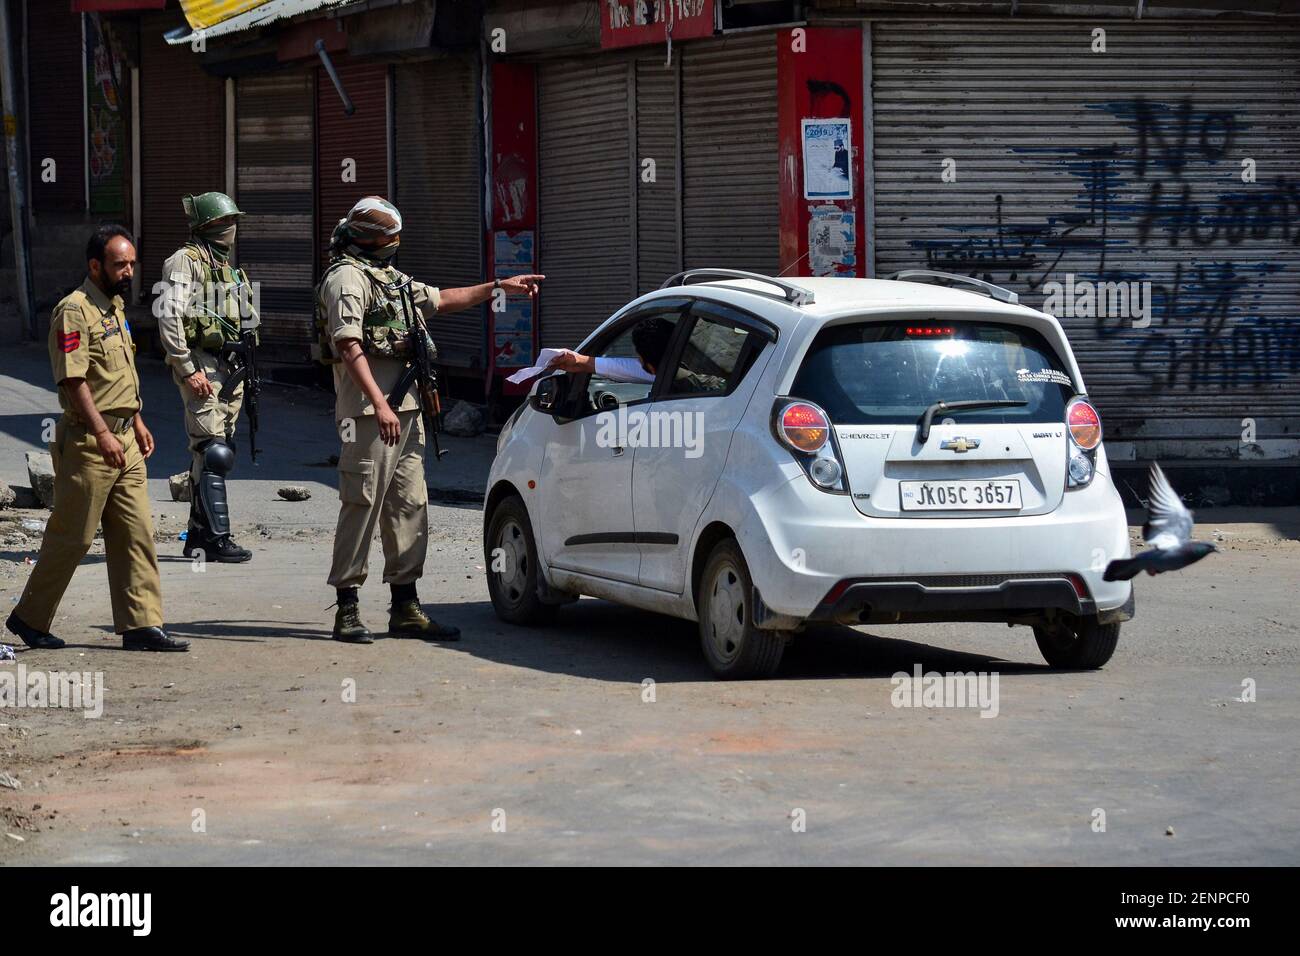 Paramilitary troopers stop a vehicle during restrictions in Srinagar, Kashmir. Kashmir valley remained shut for the 40th consecutive day following the scrapping of Article 370 by the central government which grants special status to Jammu & Kashmir. (Photo by Saqib Majeed / SOPA Images/Sipa USA) Stock Photo